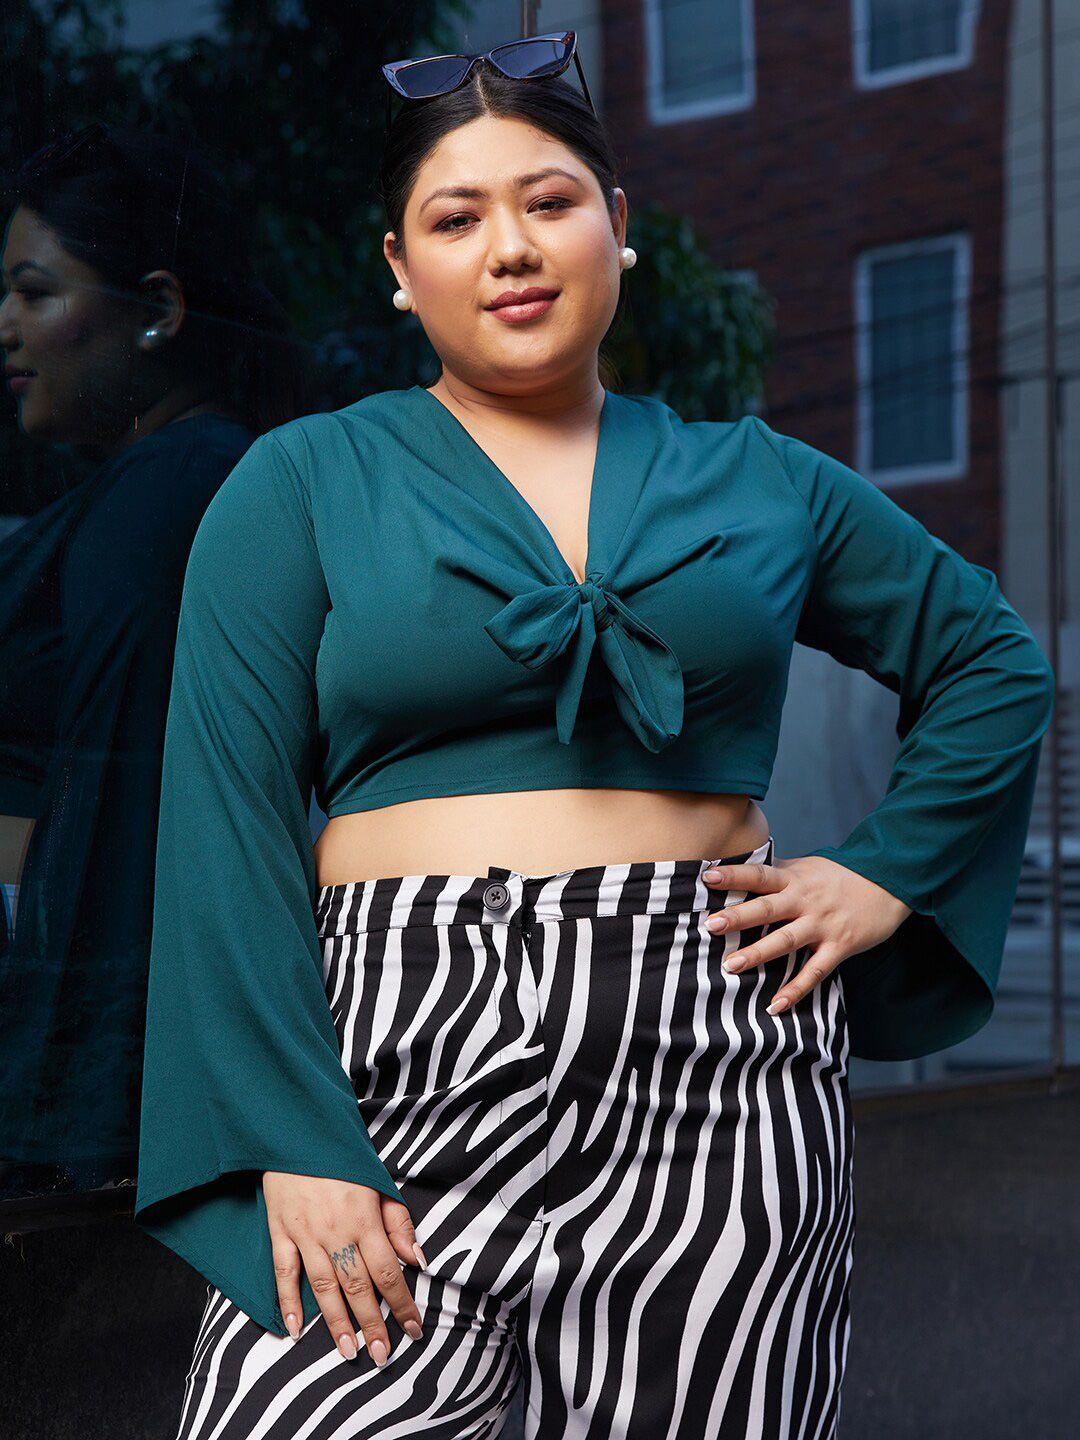 curve-by-kassually-teal-green-plus-size-v-neck-flared-sleeve-front-knotting-crop-top